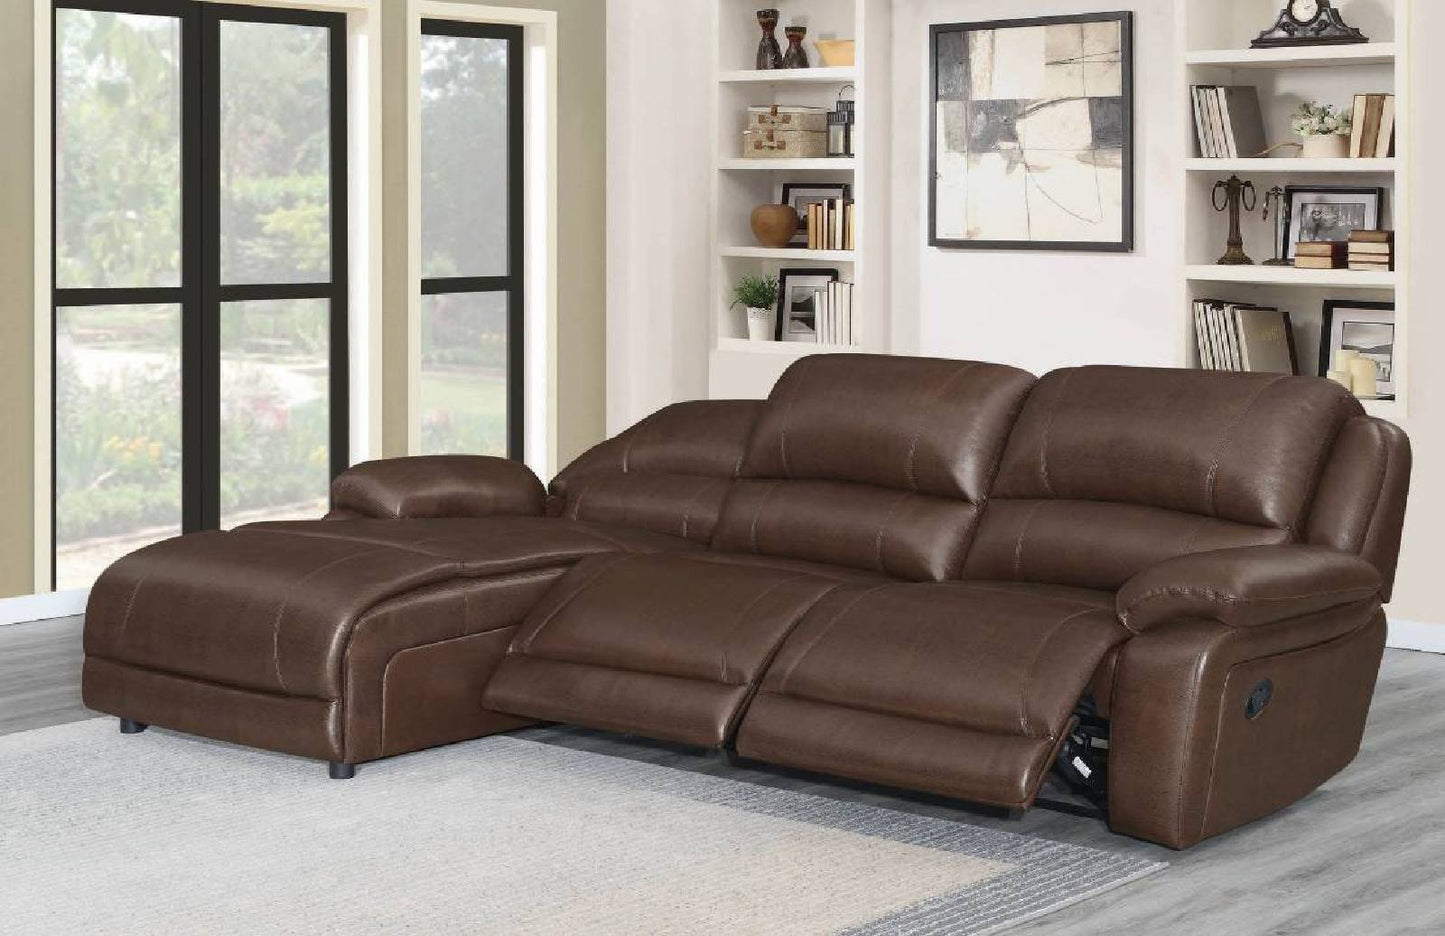 Mackenzie 3-Piece Upholstered Tufted Motion Sectional Chestnut - 600357B